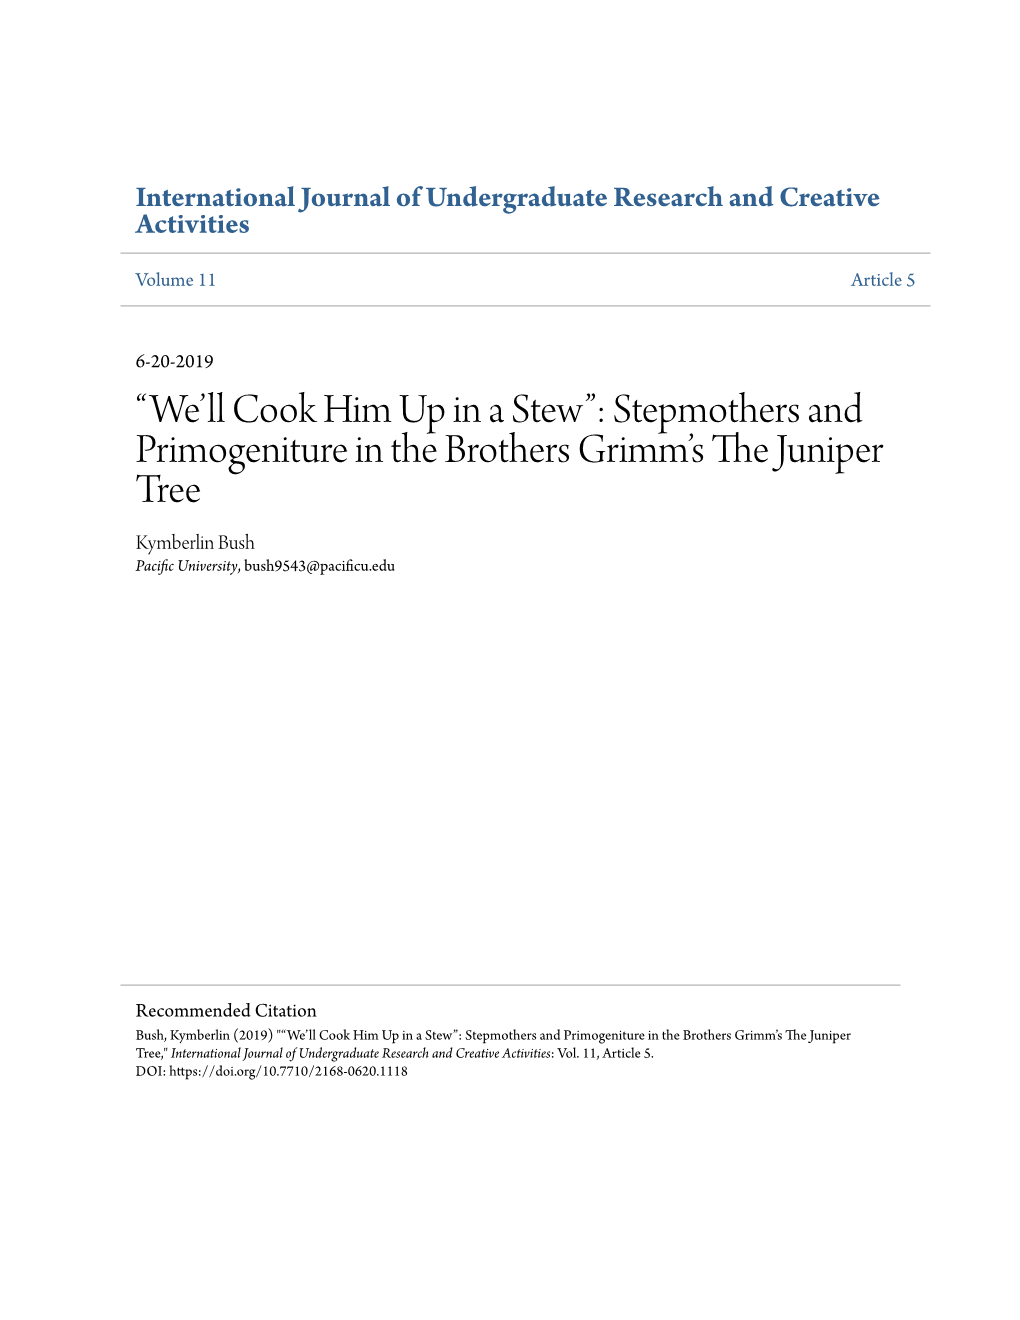 Stepmothers and Primogeniture in the Brothers Grimm's the Juniper Tree